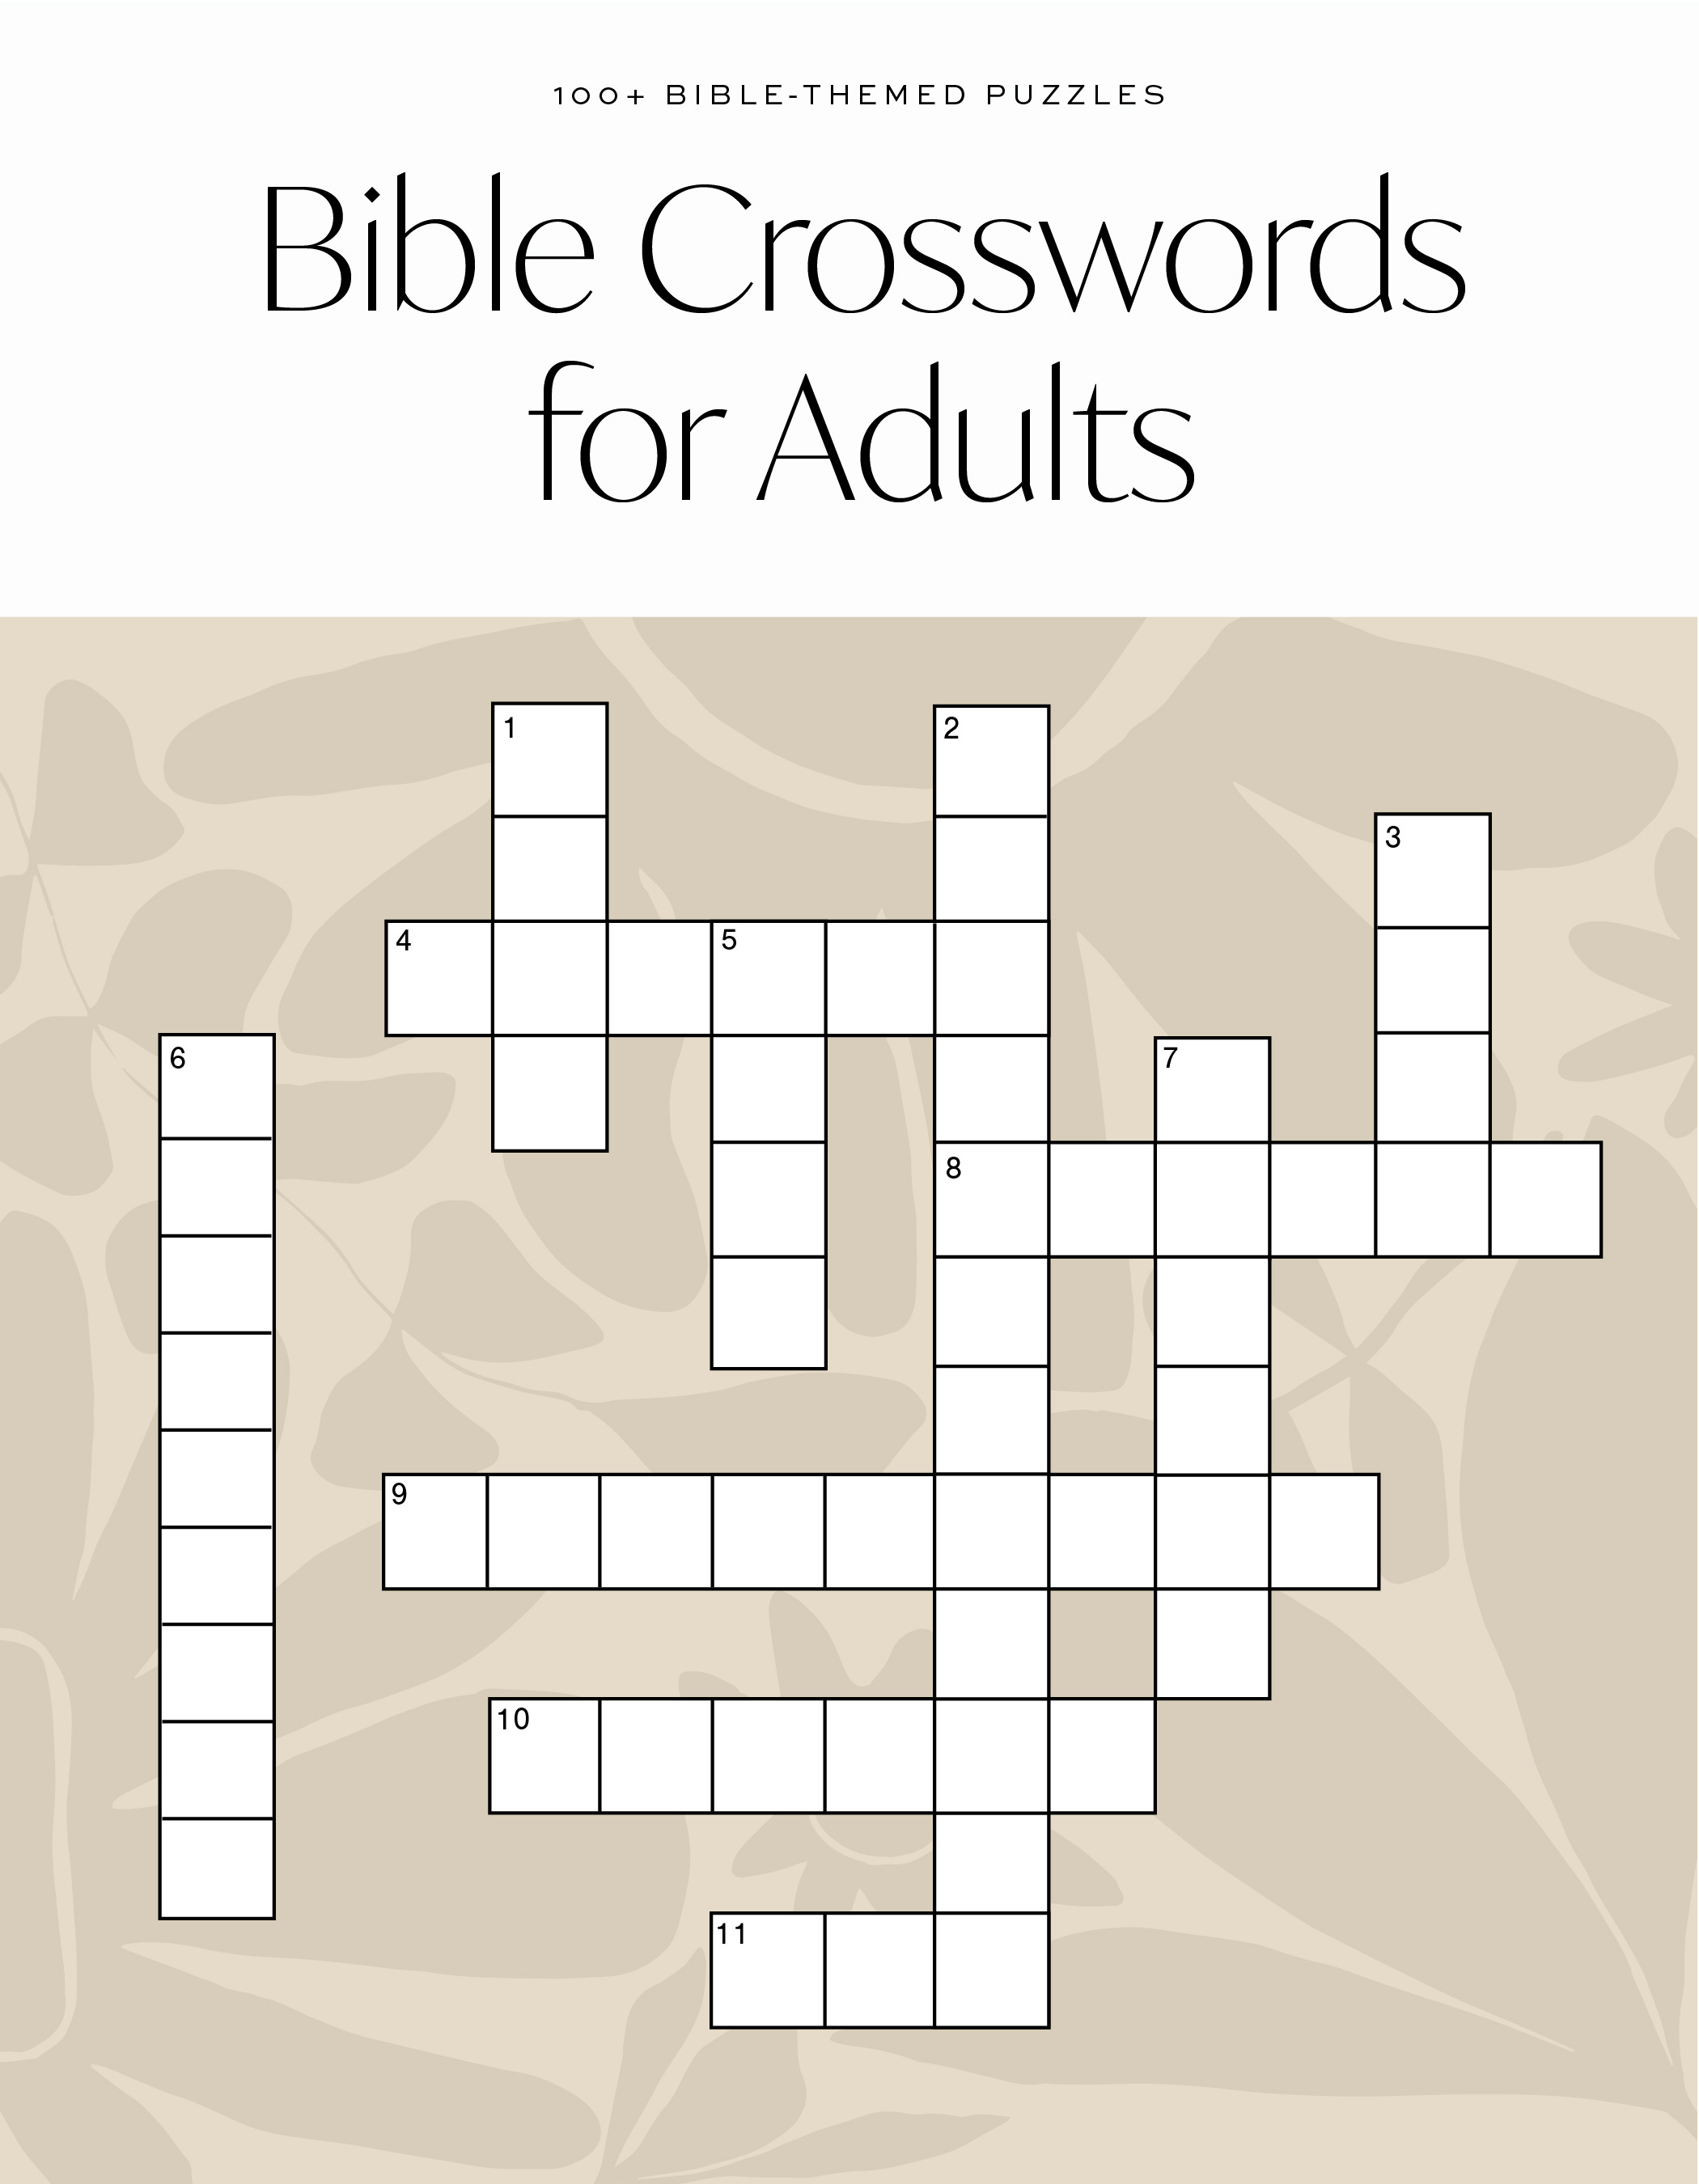 Bible Crossword for Adults : A Modern Bible-Themed Crossword Activity Book to Strengthen Your Faith | 